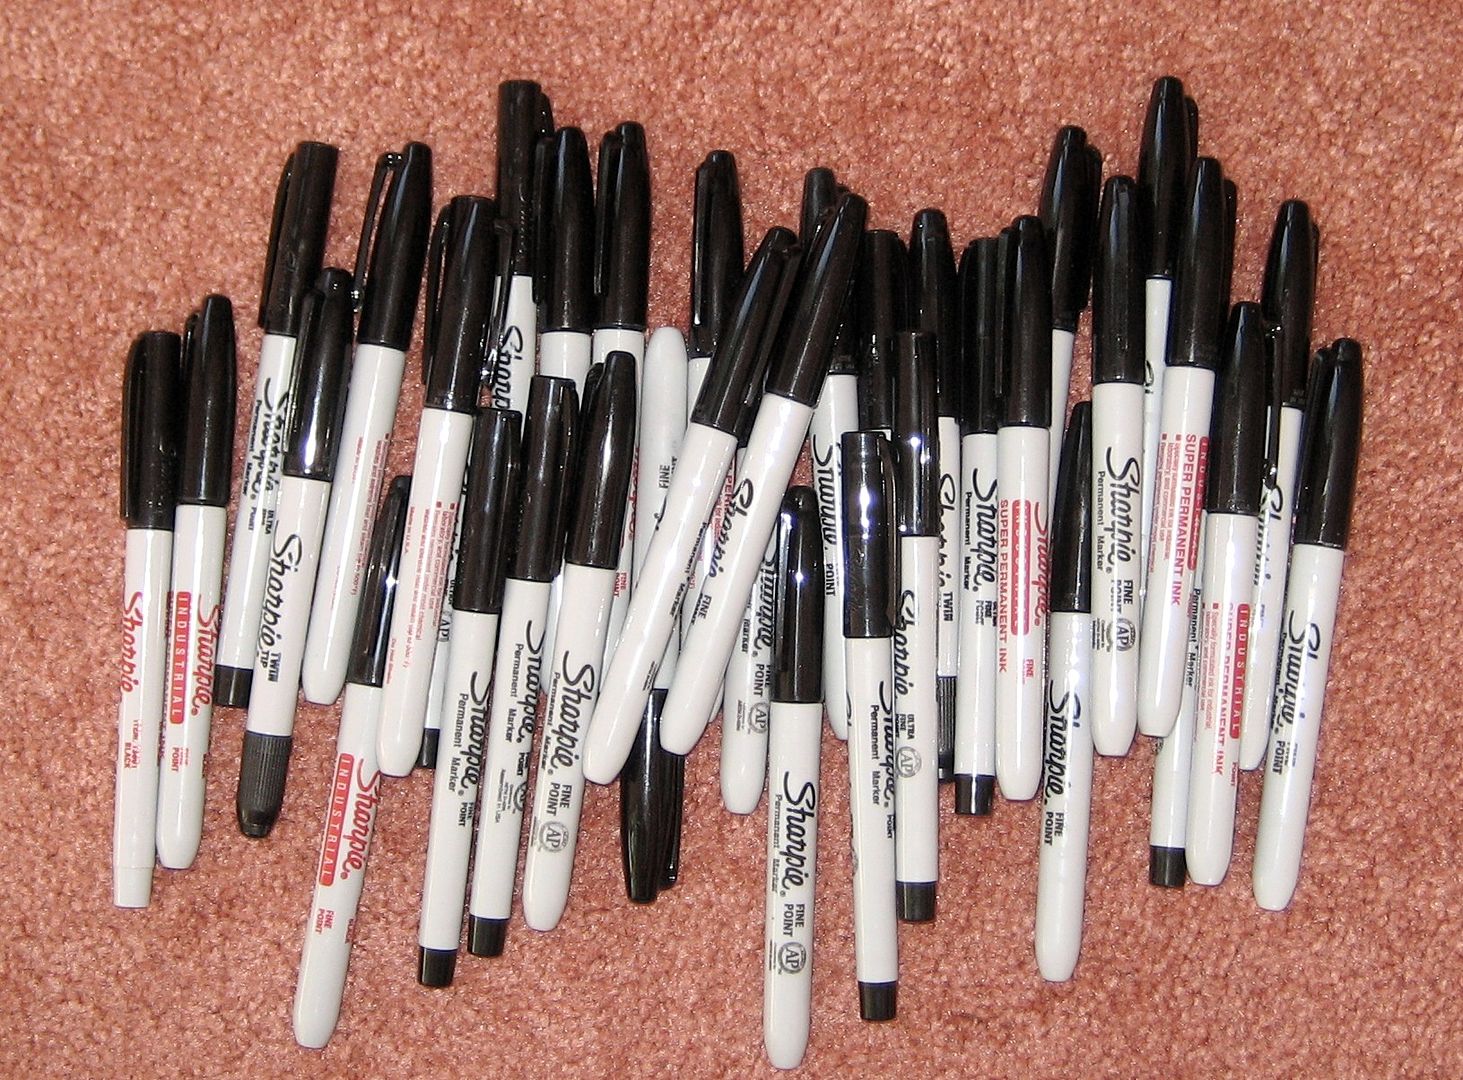 About 25% of pens